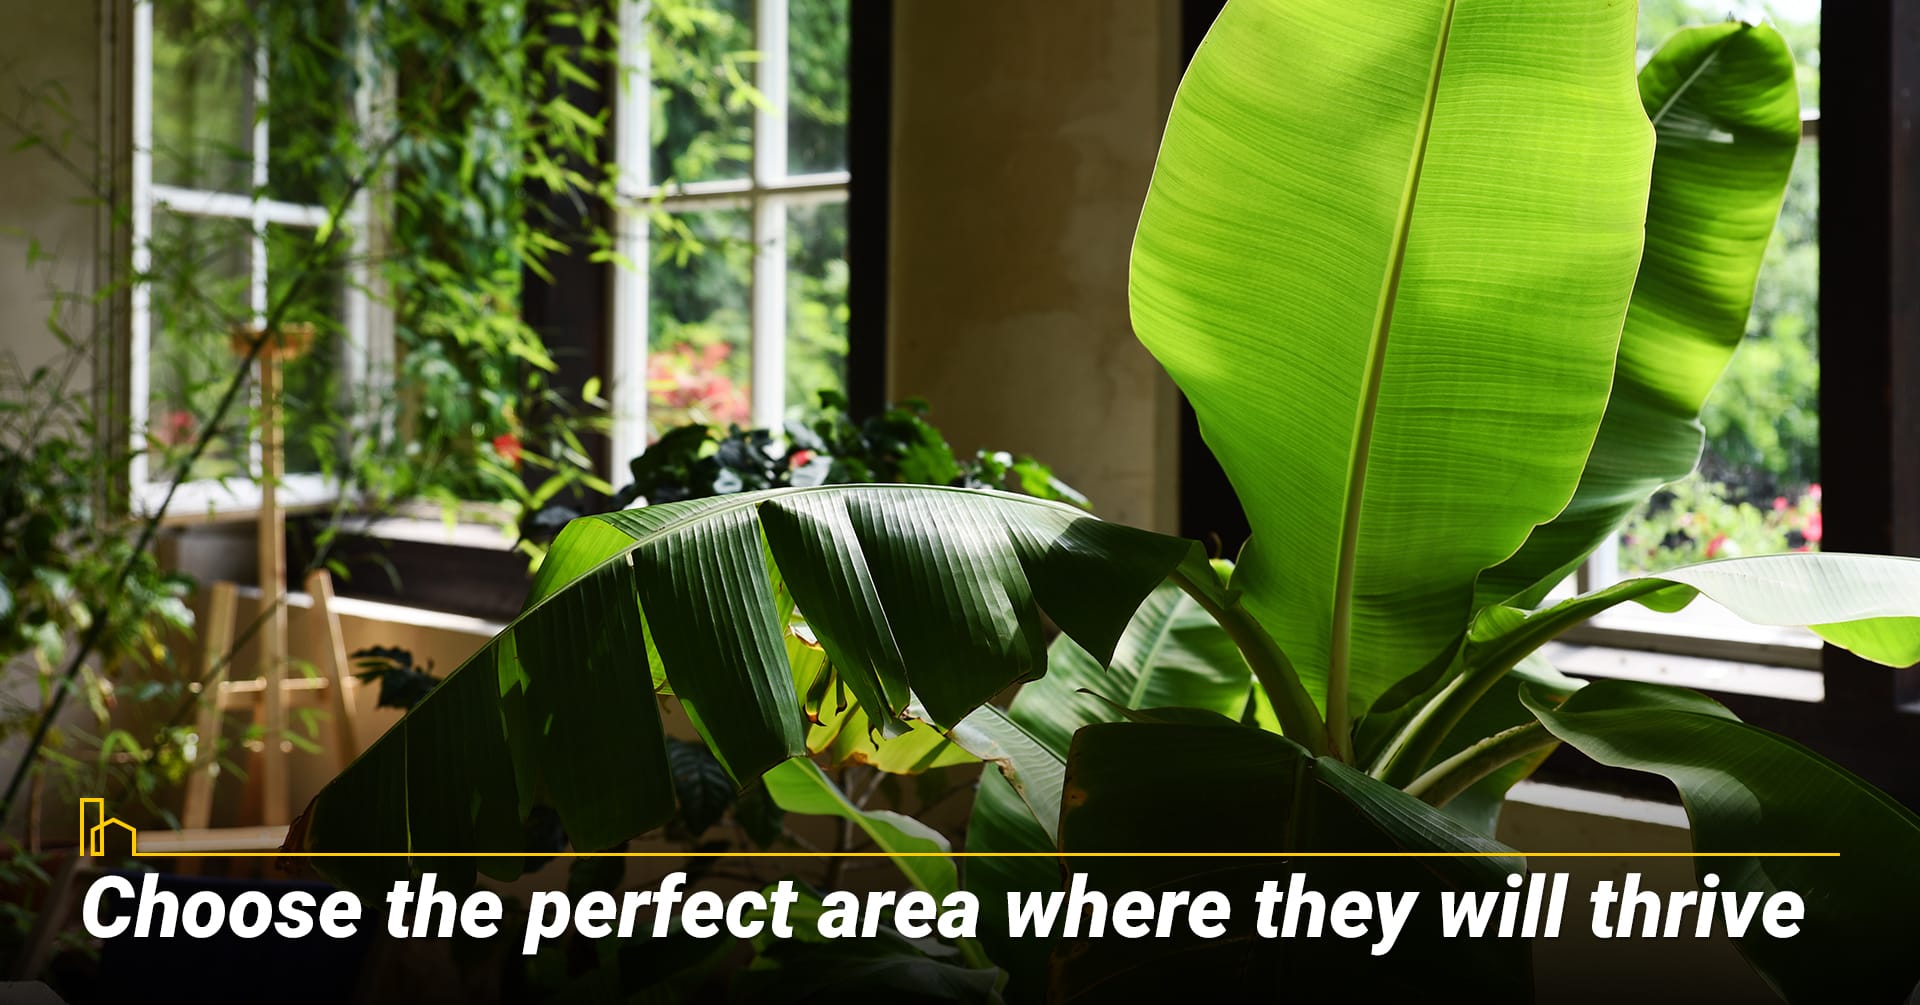 Choose the perfect area where they will thrive